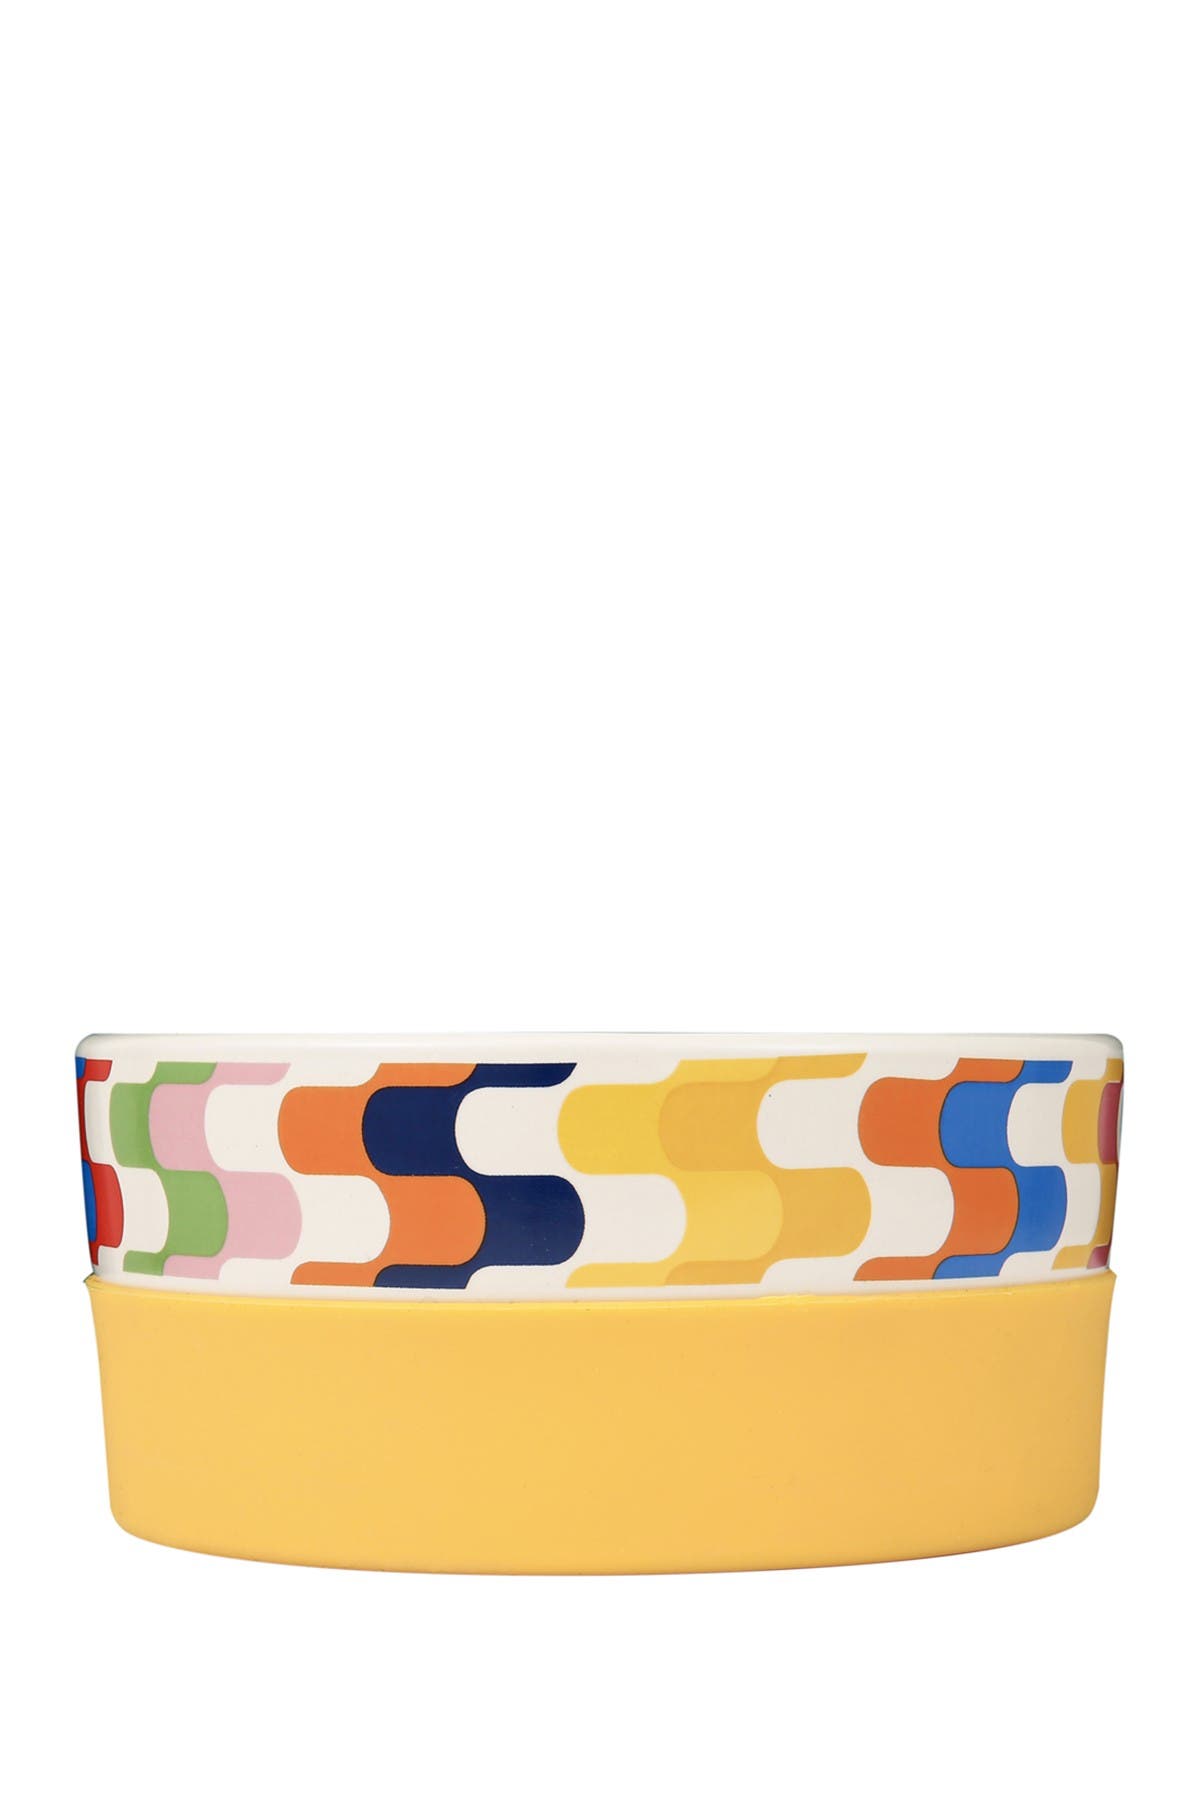 Fetch 4 Pets Jonathan Adler: Now House "bargello" Duo Dog Bowl In Open Miscellaneous